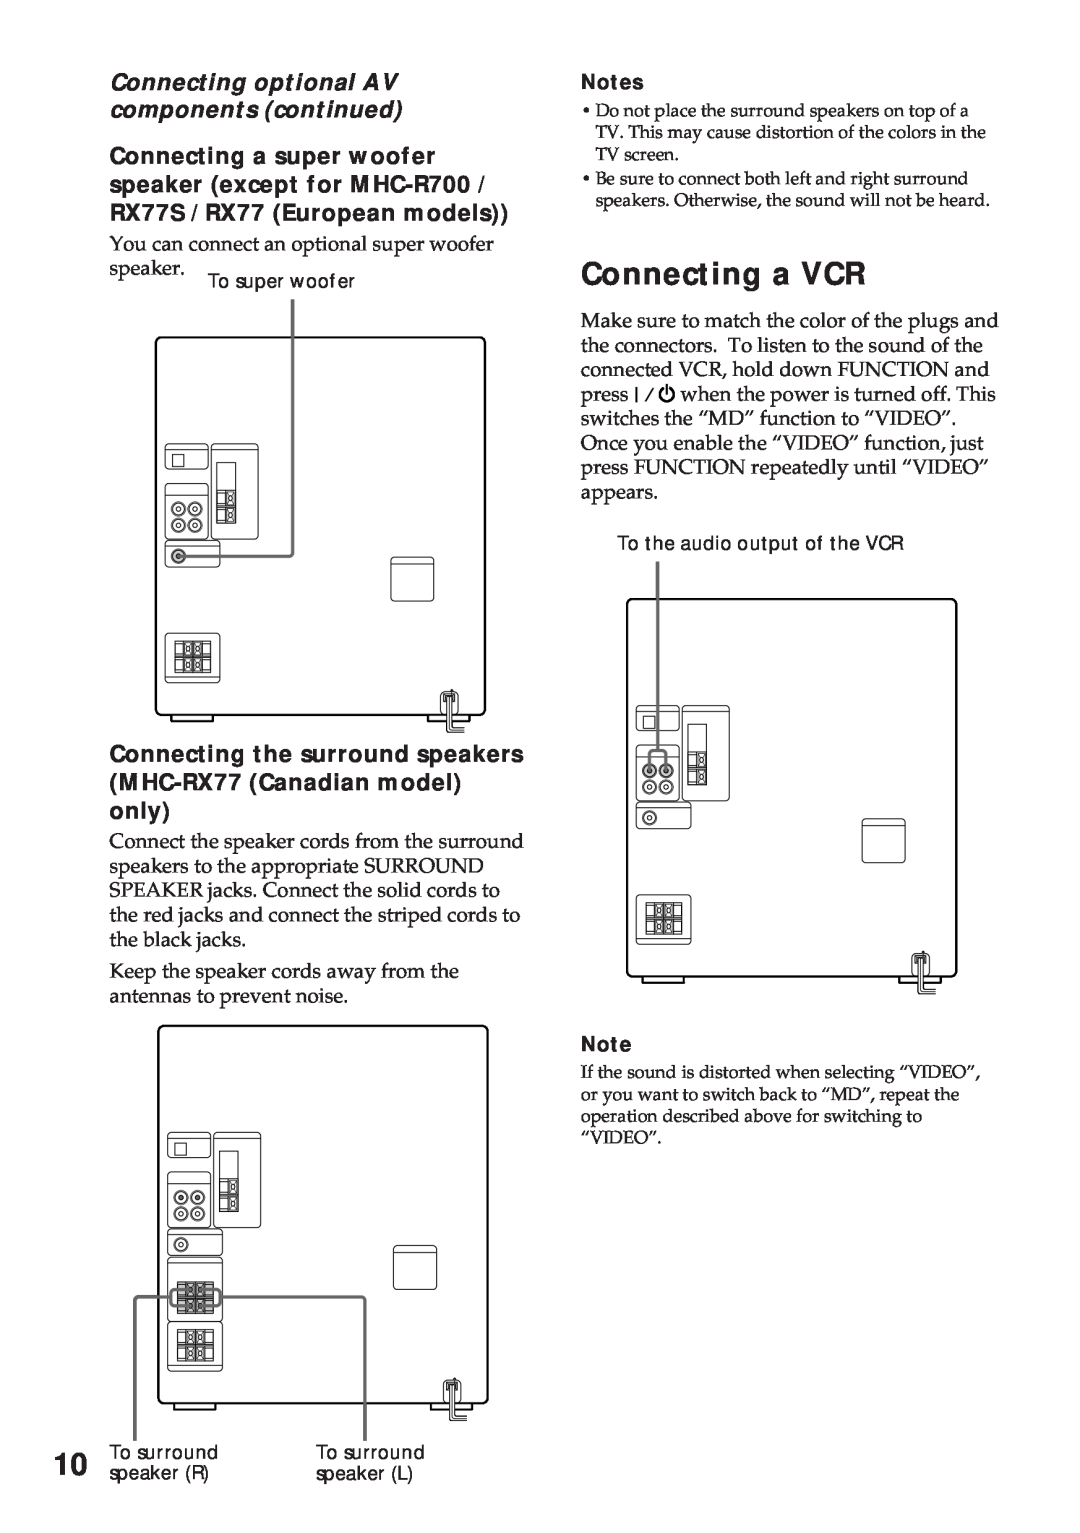 Sony MHC-RX900 manual Connecting a VCR, Connecting optional AV components continued 